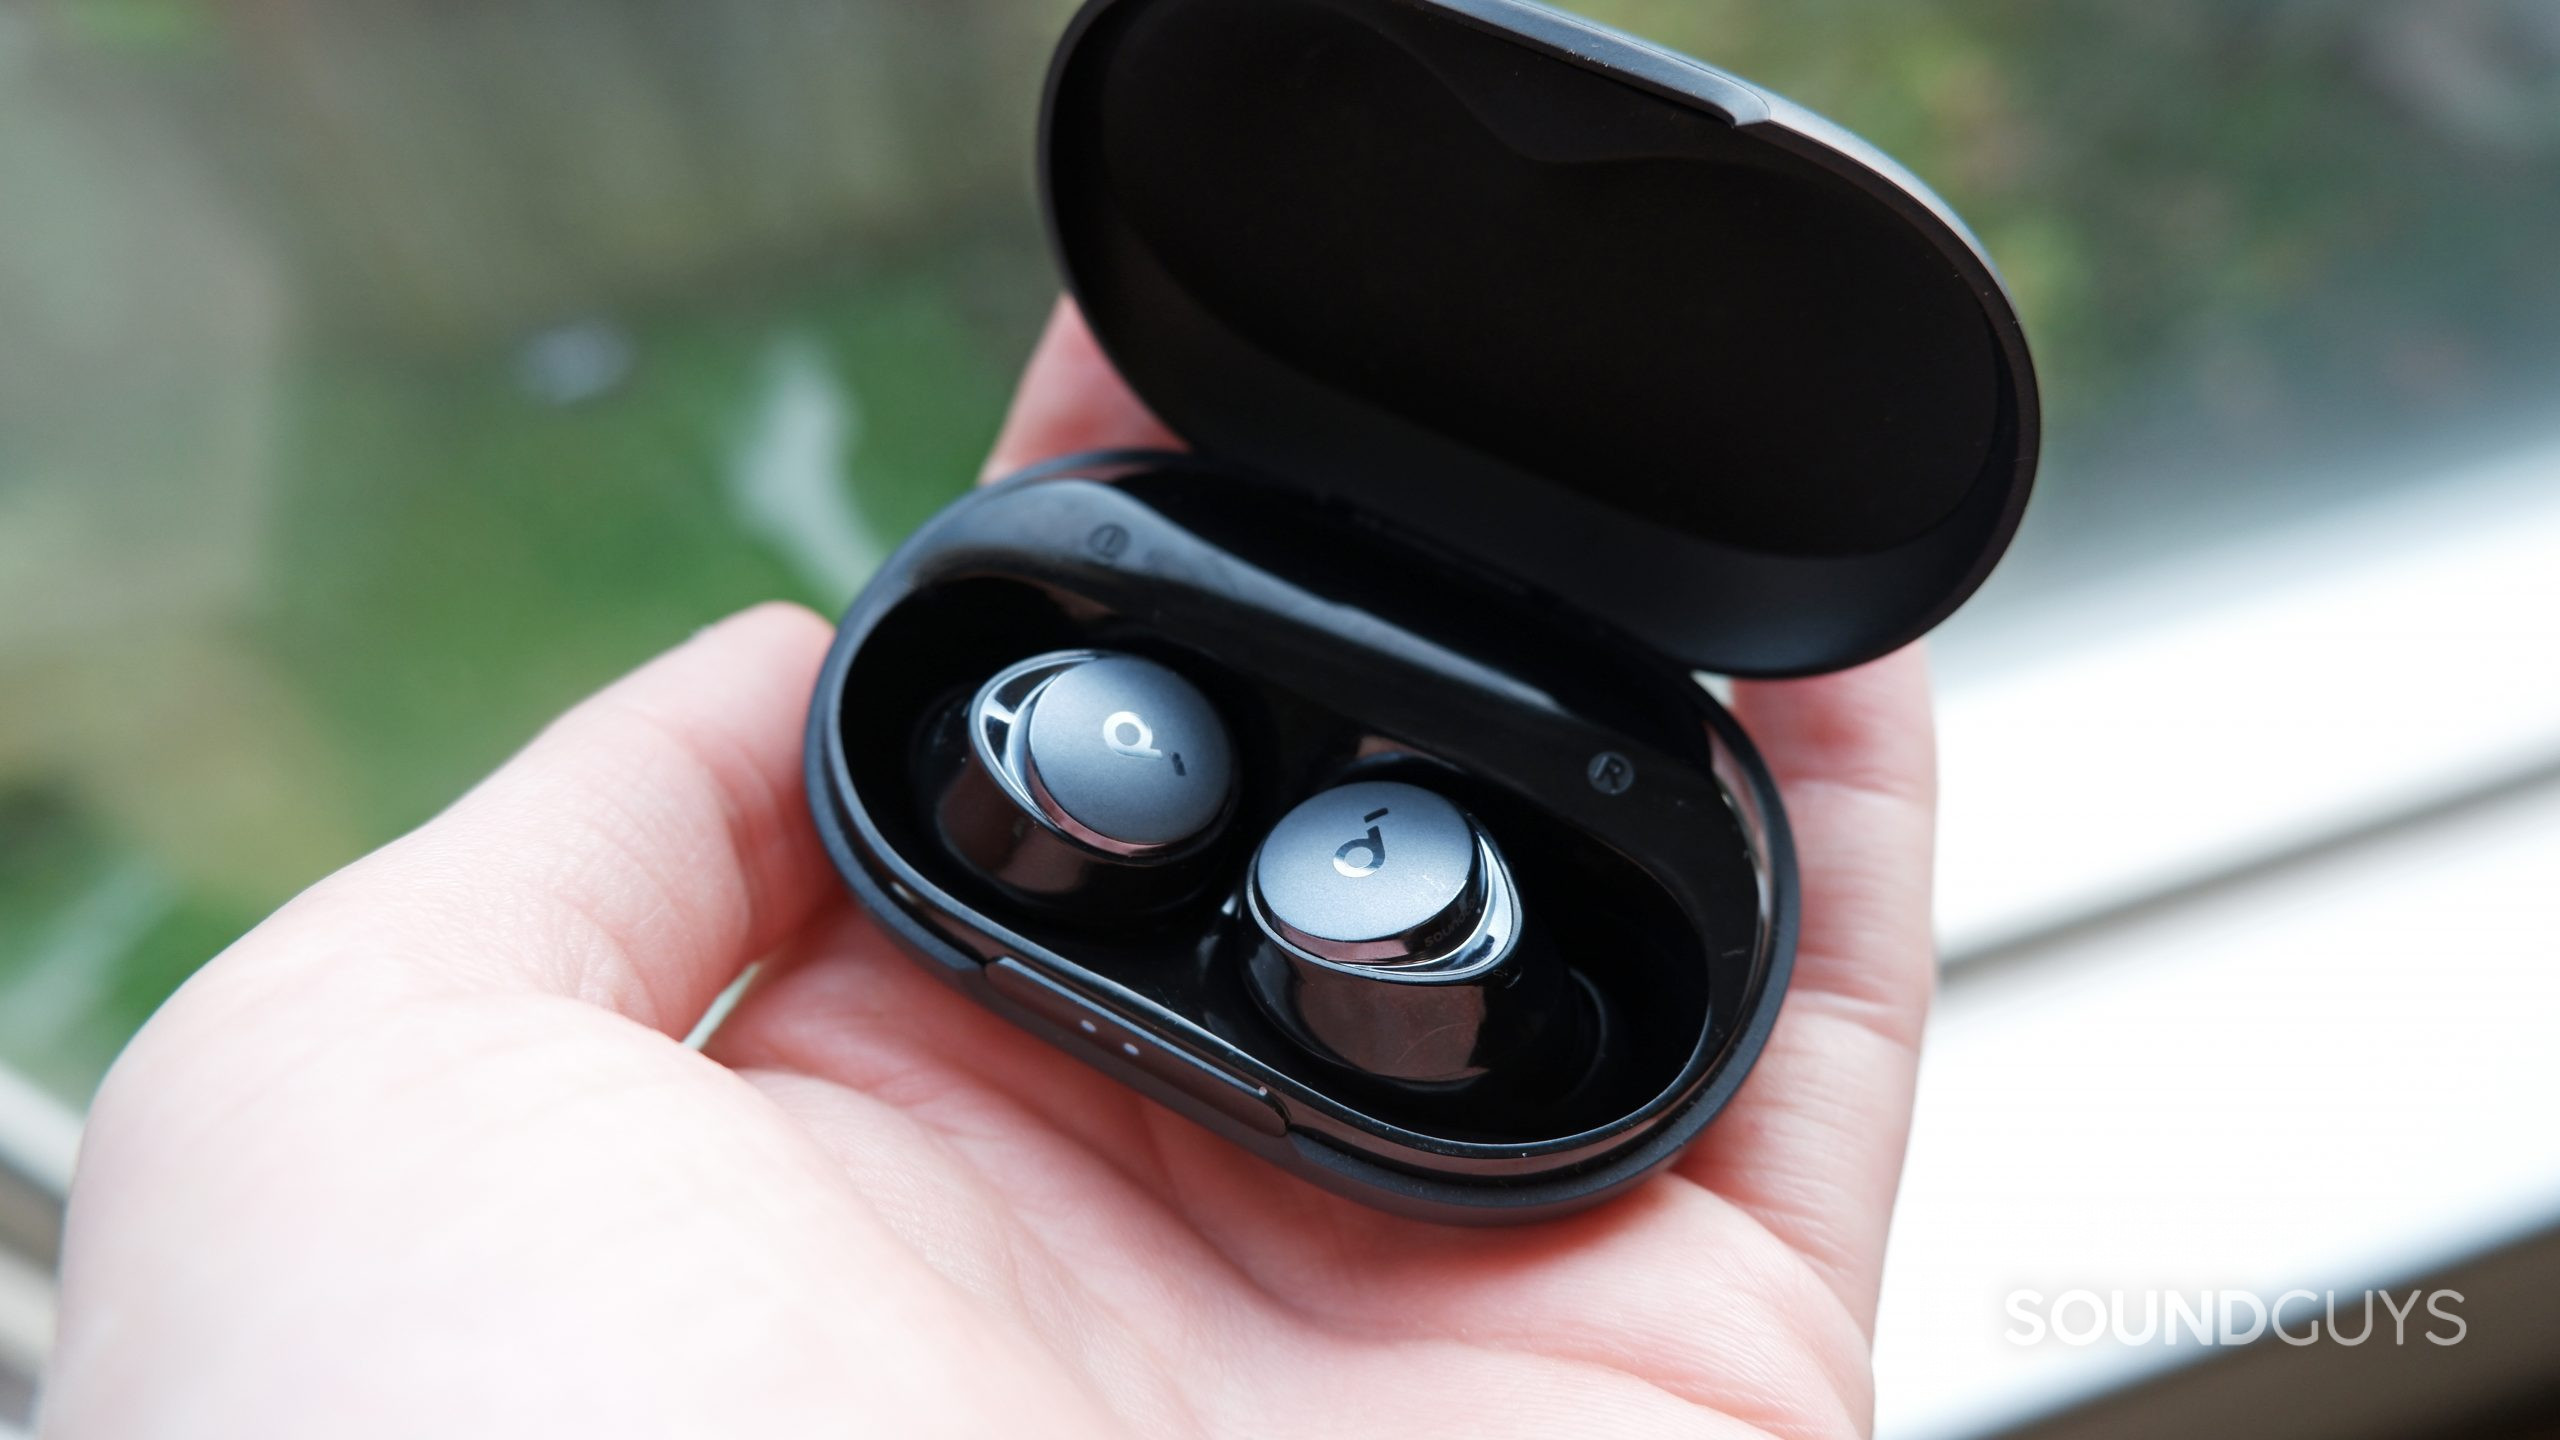 20 Best Wireless Headphones (2023): Earbuds, Noise Canceling, and